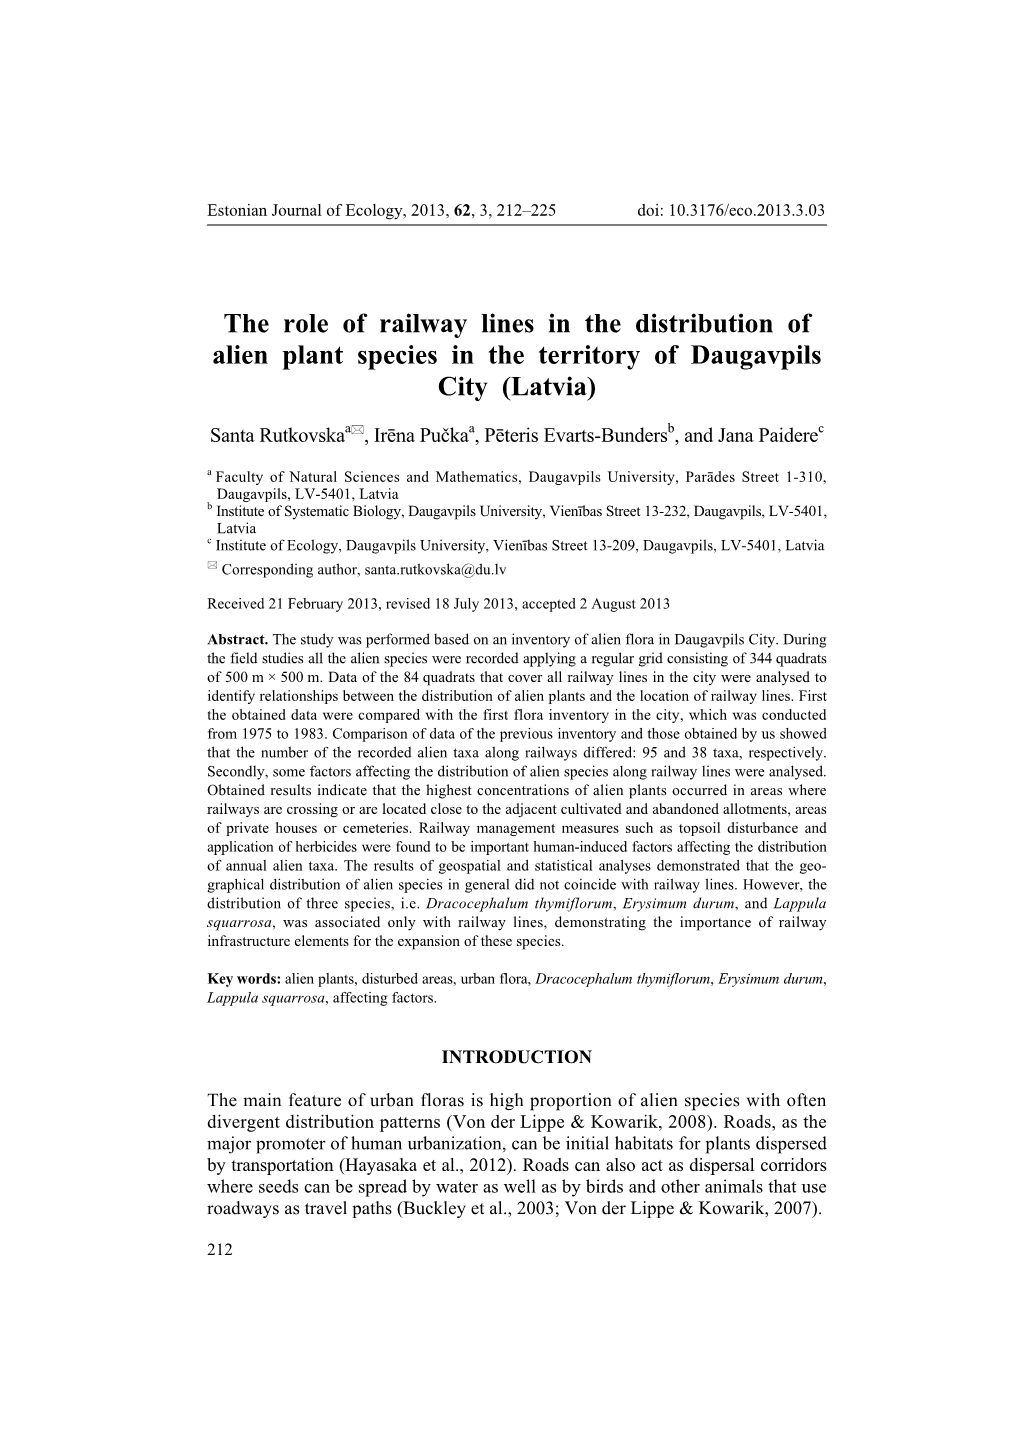 The Role of Railway Lines in the Distribution of Alien Plant Species in the Territory of Daugavpils City (Latvia)